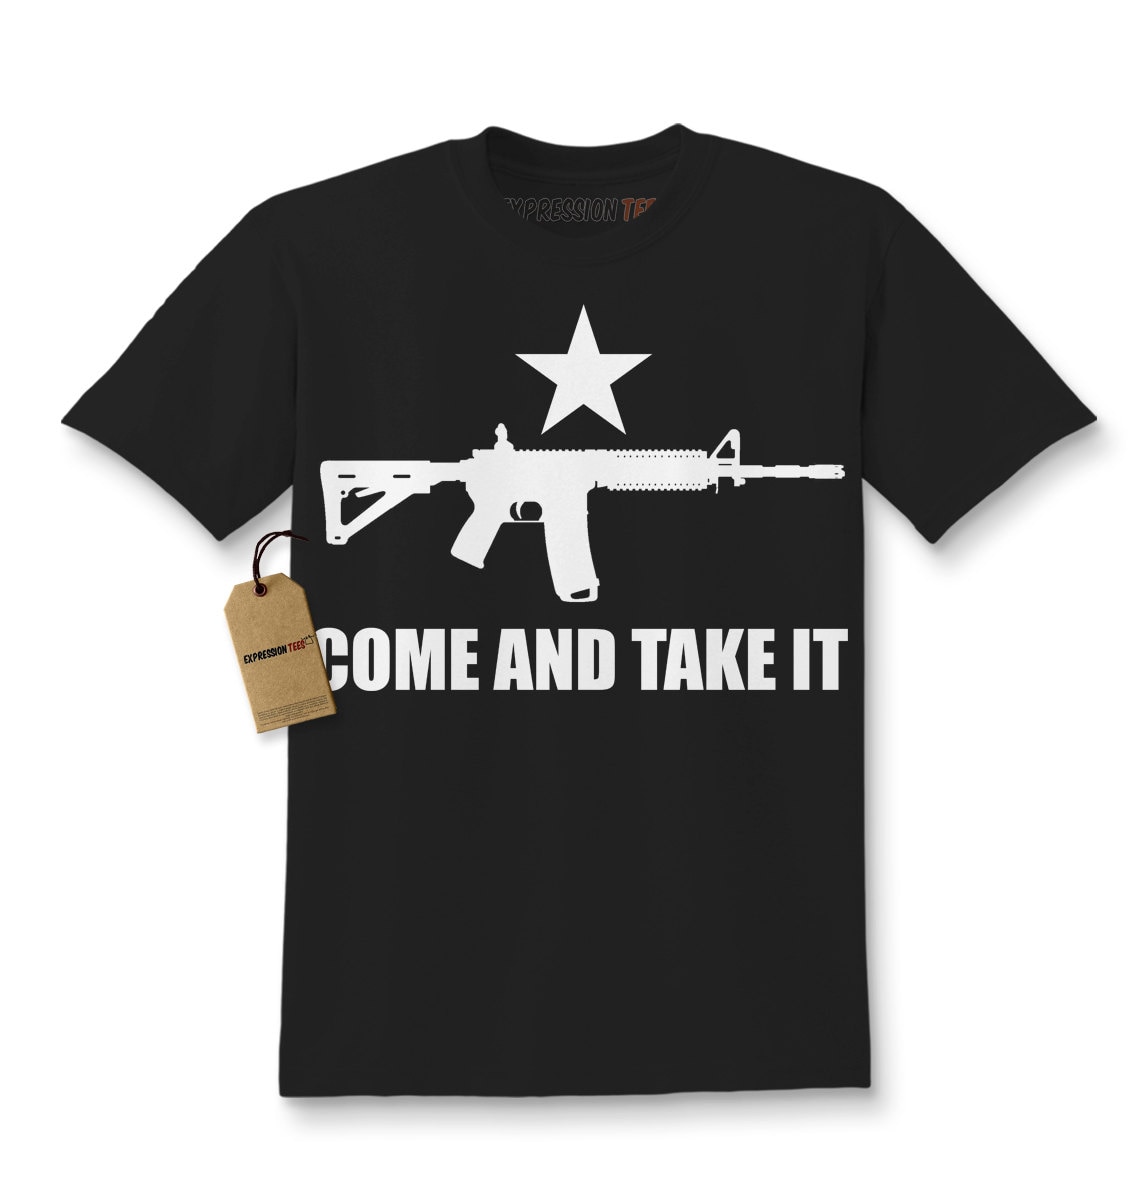 Kids Come and Take It Shirt Mature Youth AR-15 T-Shirt 1105